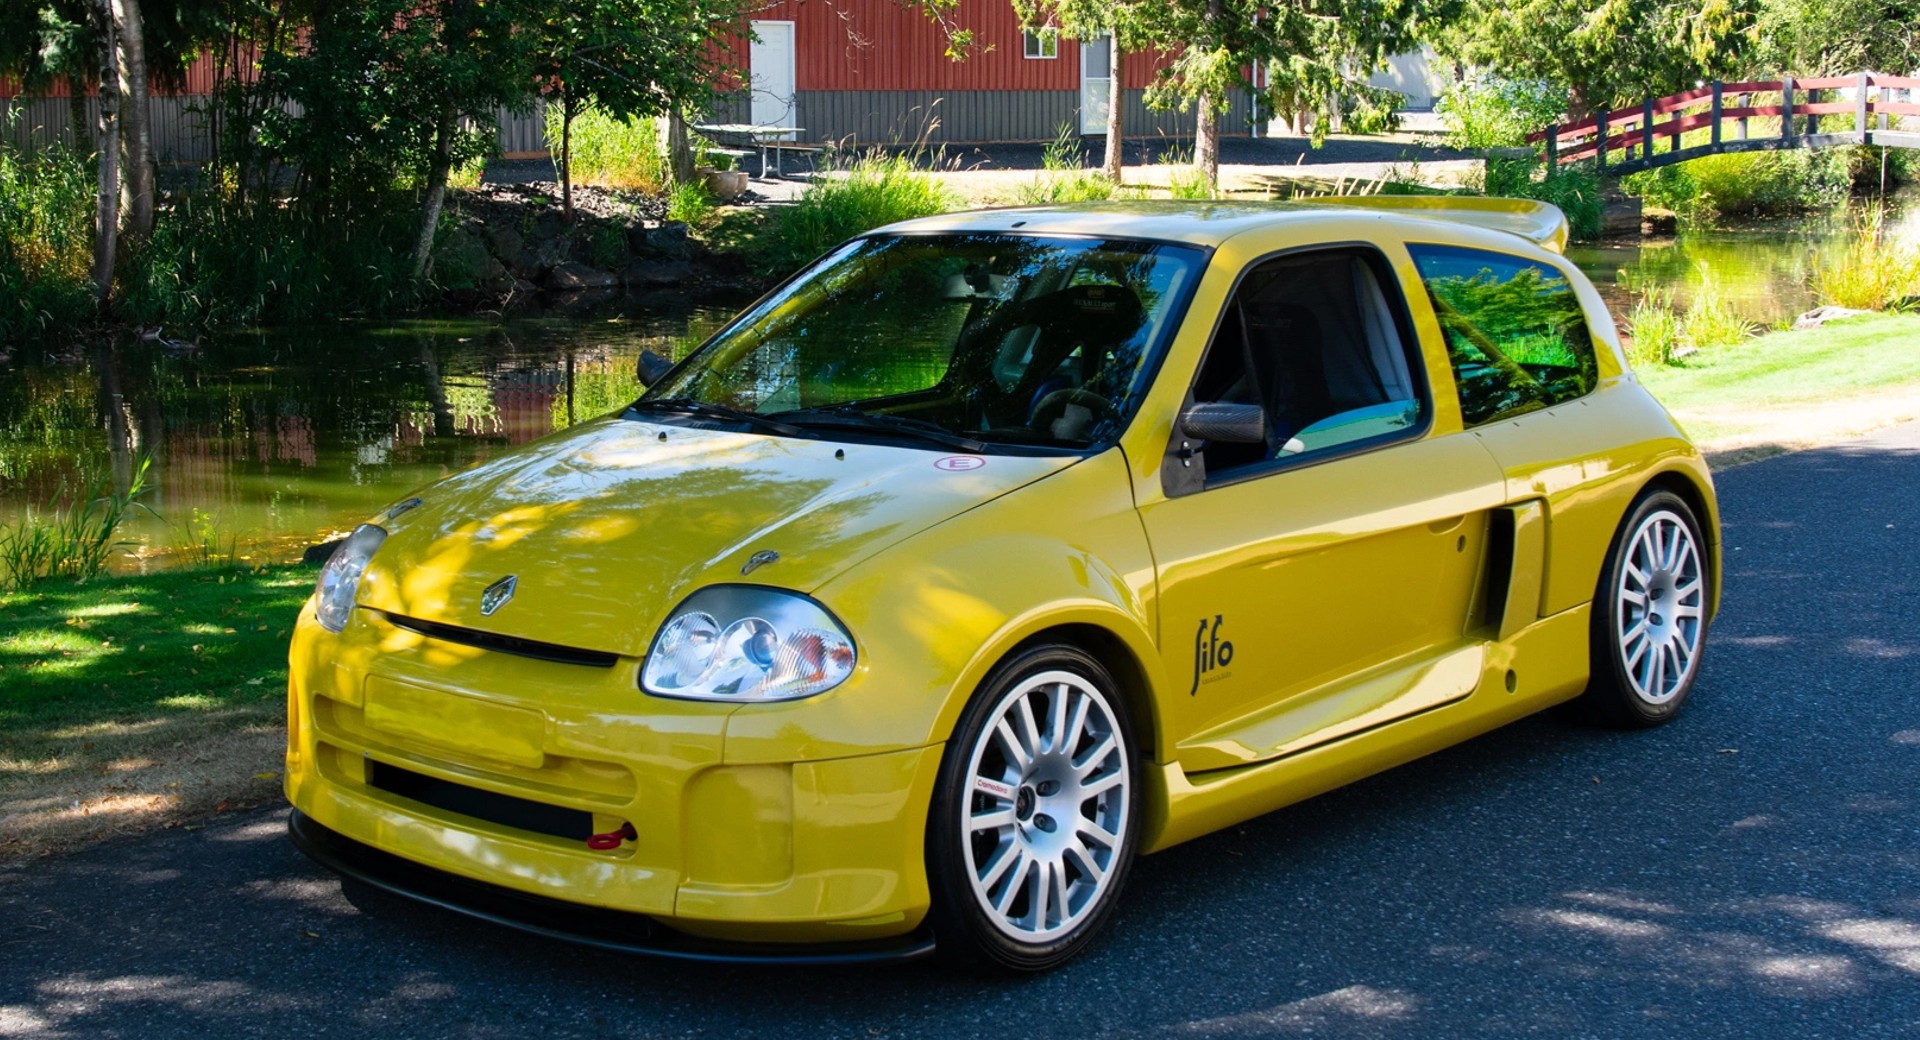 Here's Your Chance To Own A Super-Rare Renault Clio V6 Trophy Race